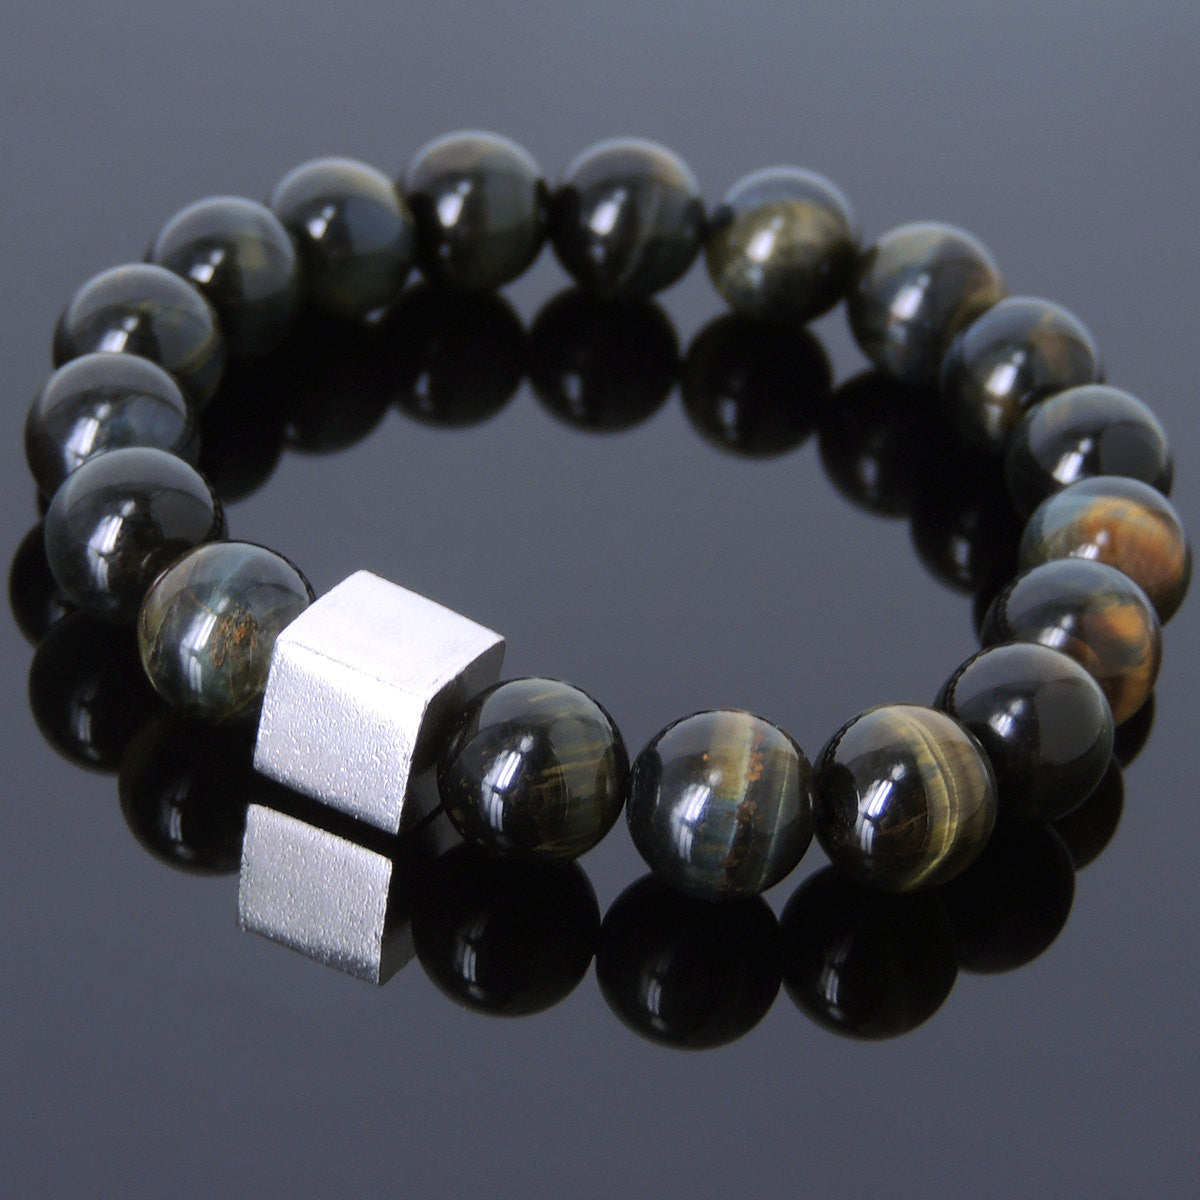 Rare Mixed Brown Blue Tiger Eye Healing Gemstone Bracelet with S925 Sterling Silver Geometric Cube Bead - Handmade by Gem & Silver BR576